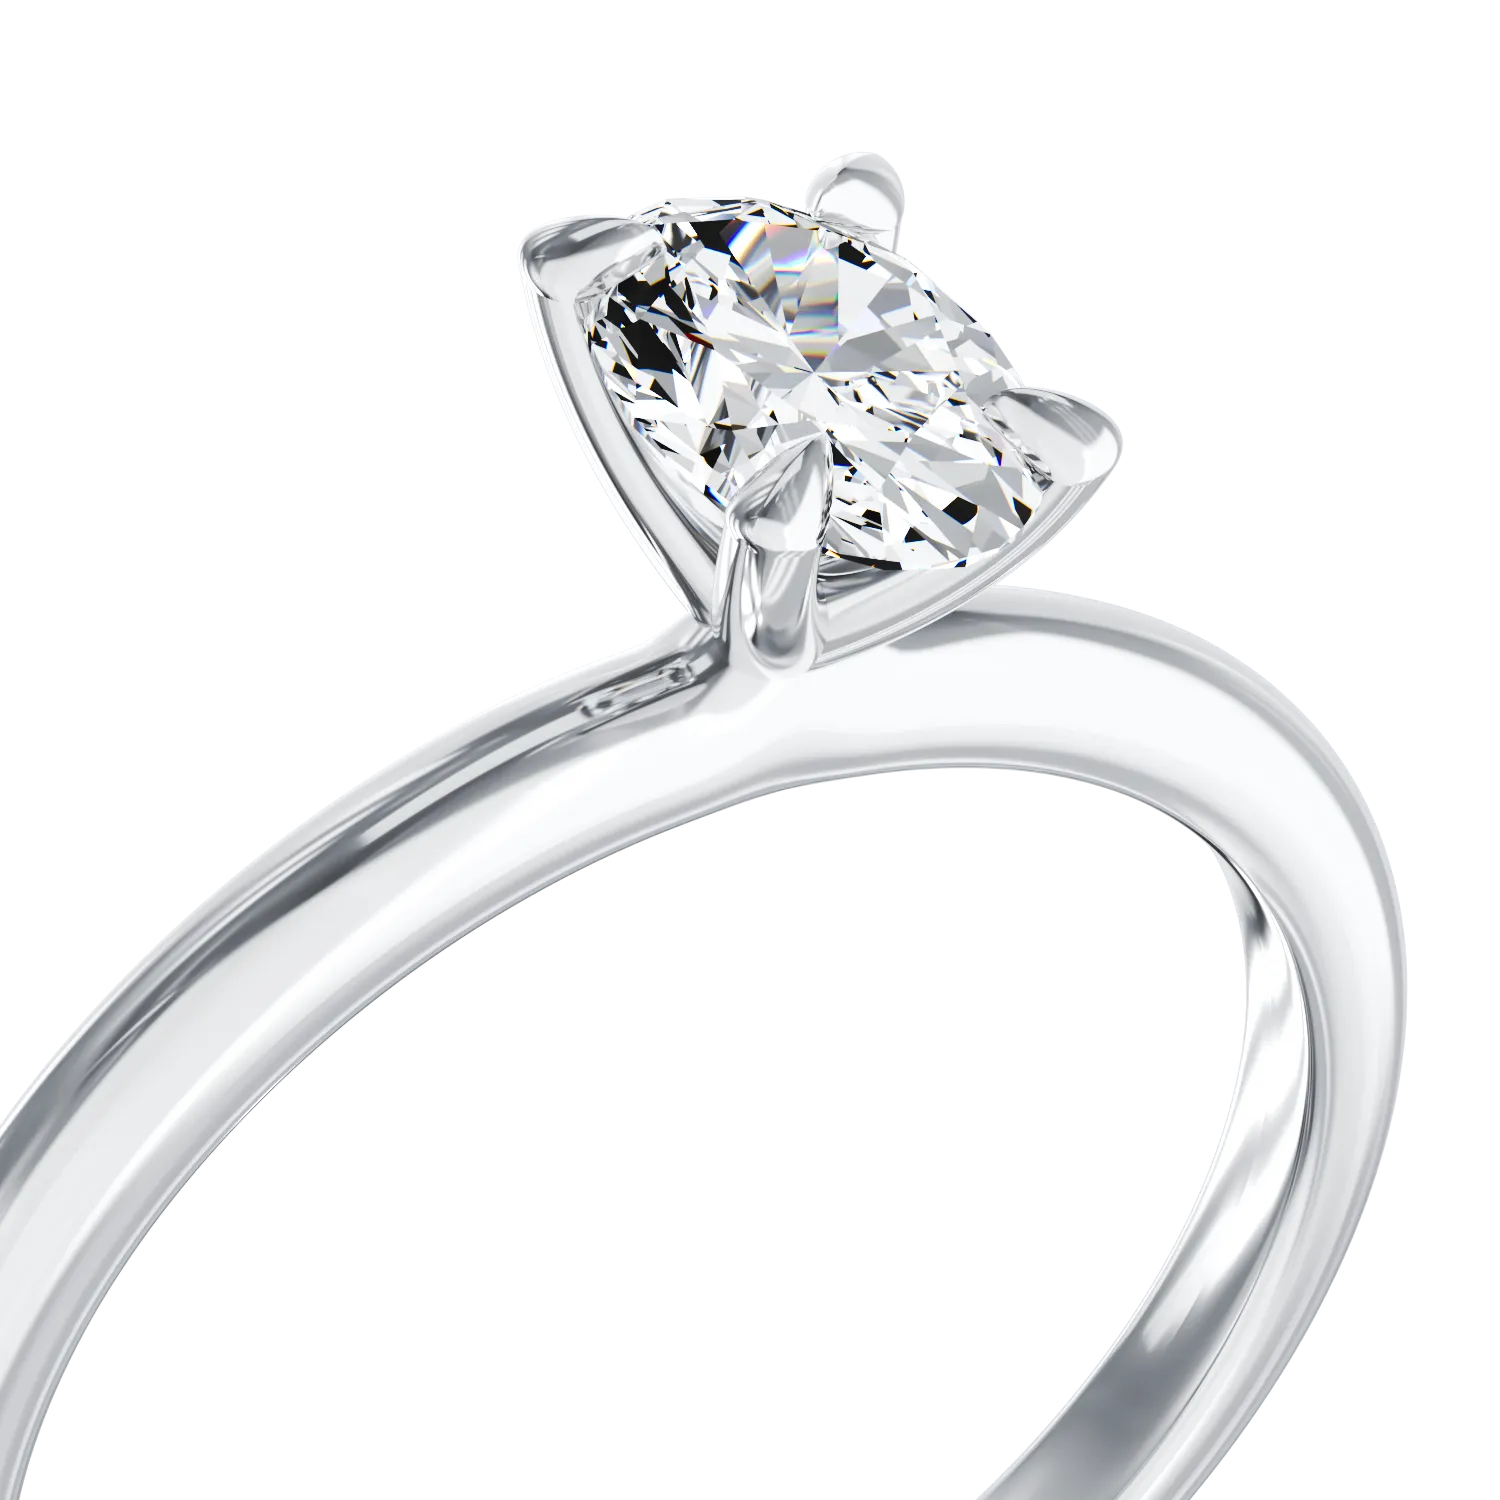 18K white gold engagement ring with diamond of 0.3ct